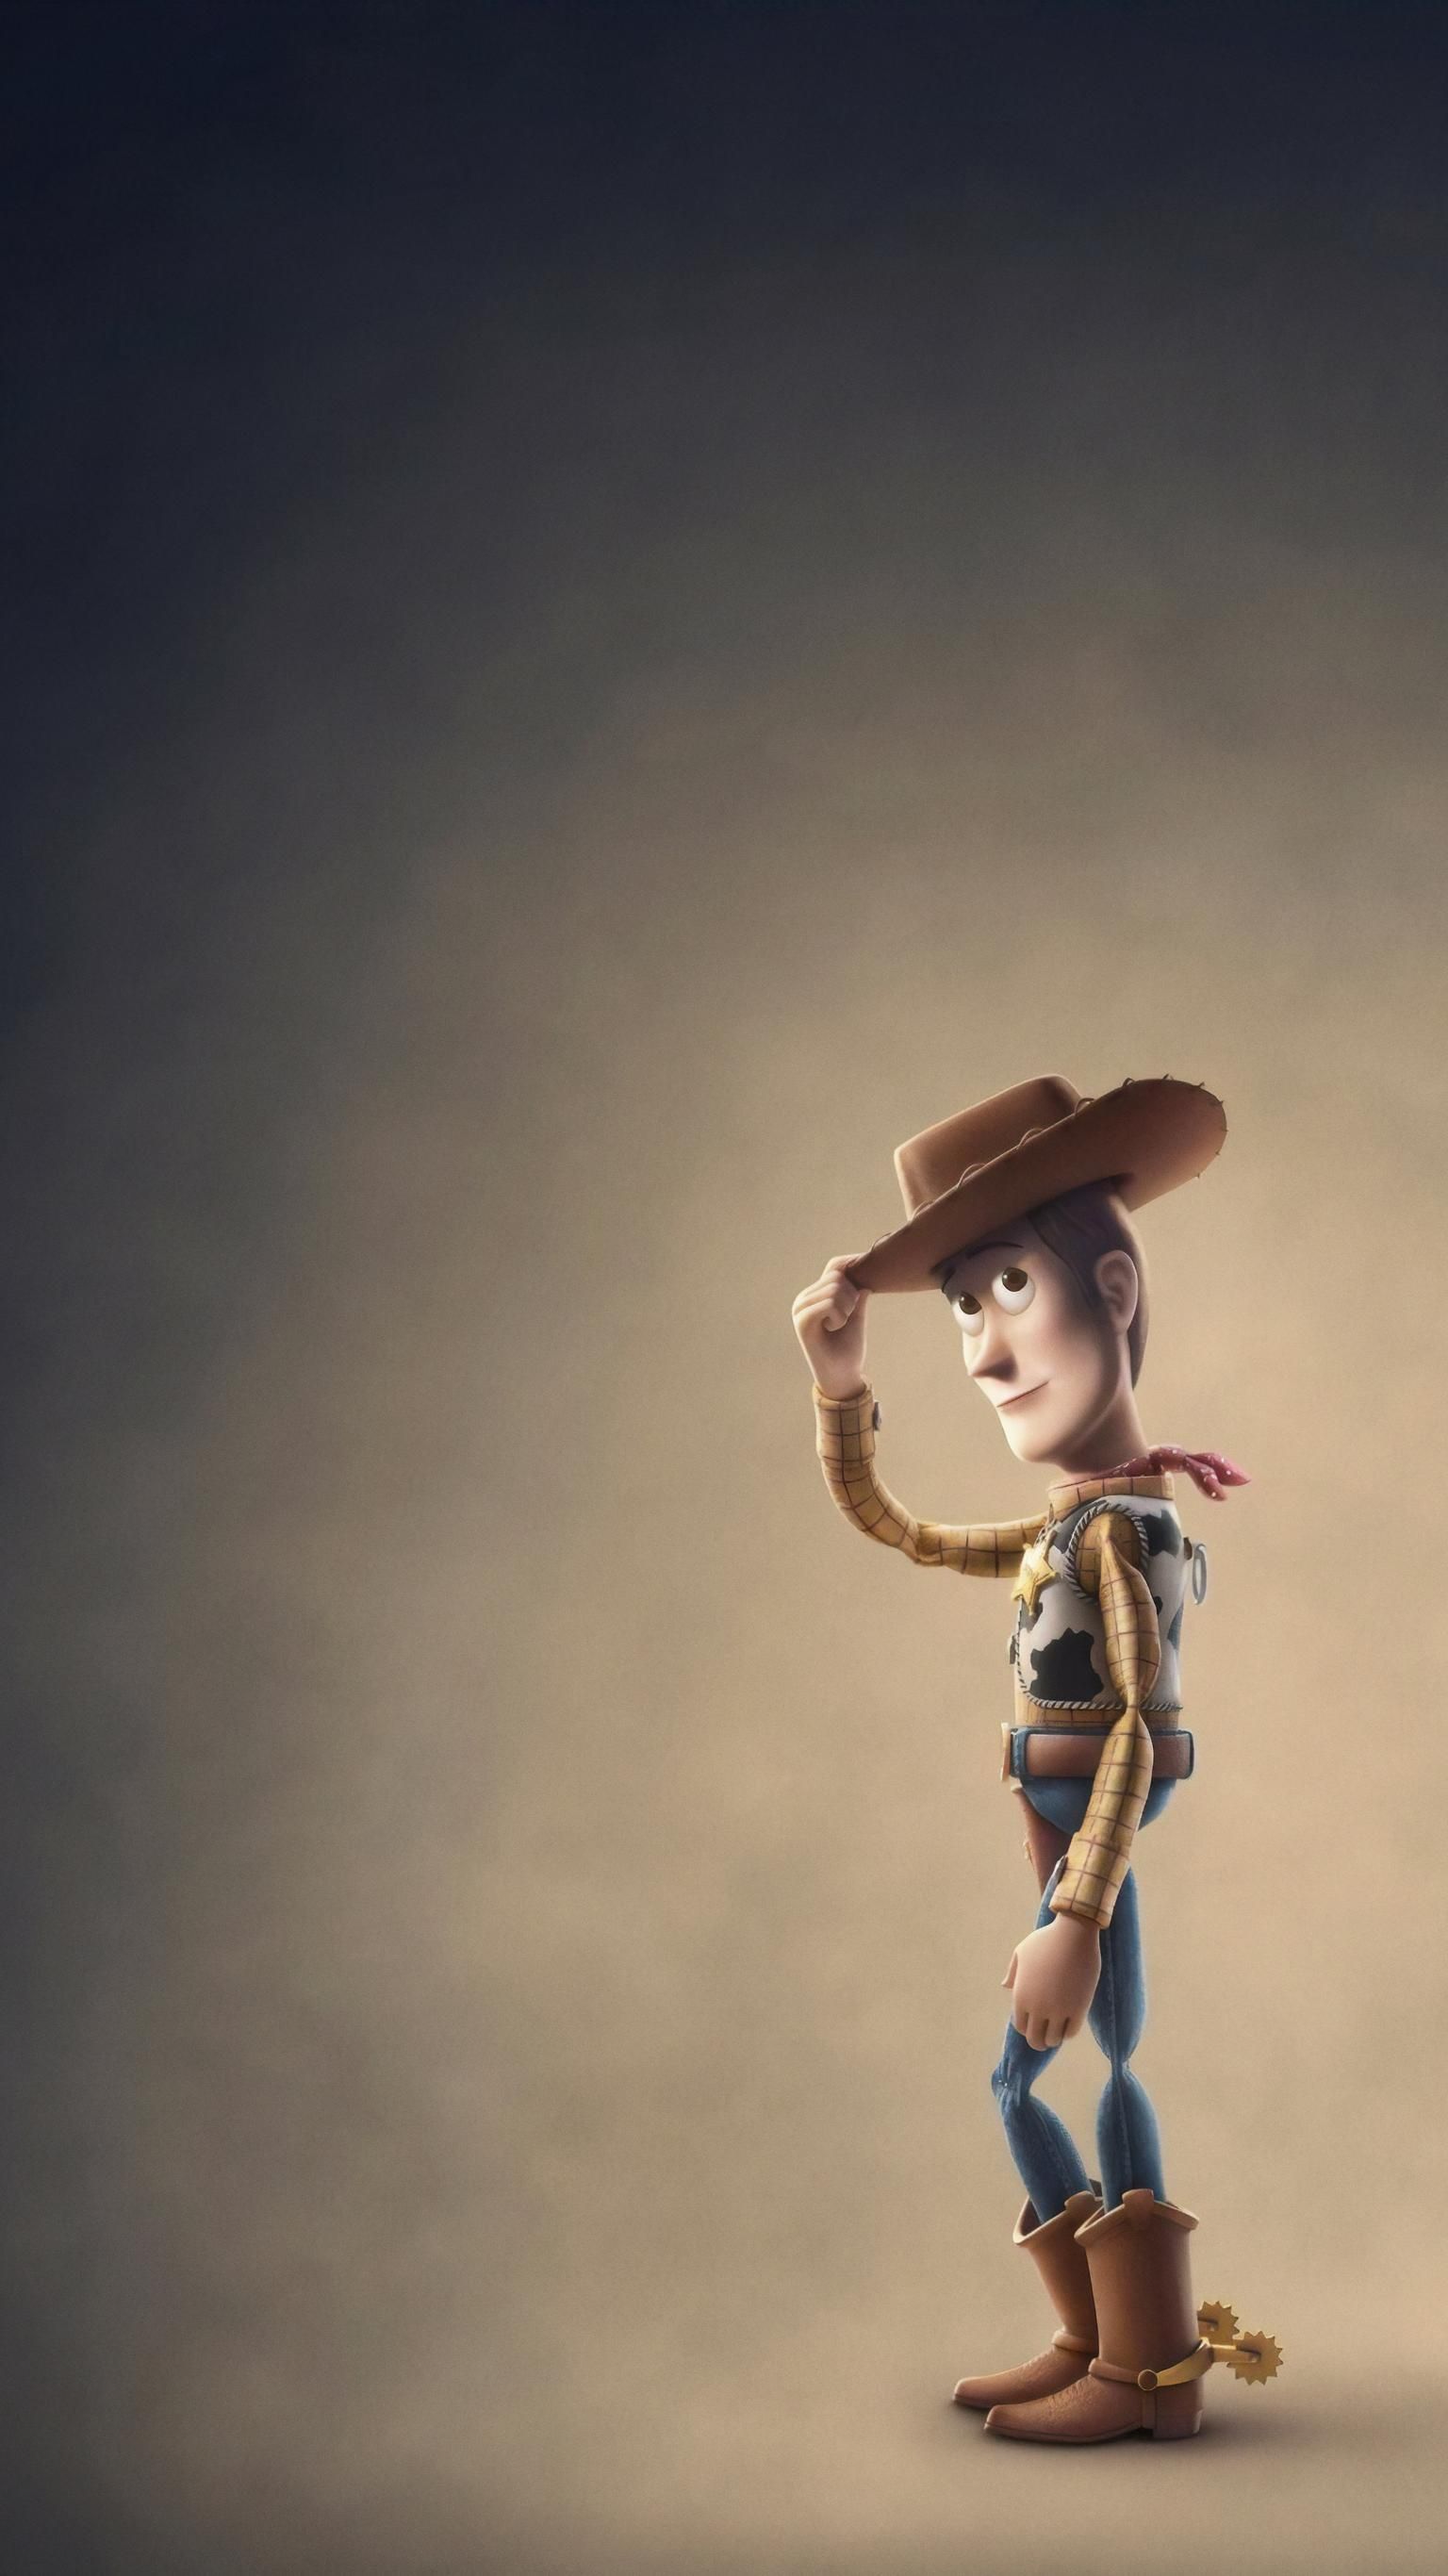 Toy Story 4 2019 Phone Wallpaper in 2019 Phone Wallpapers